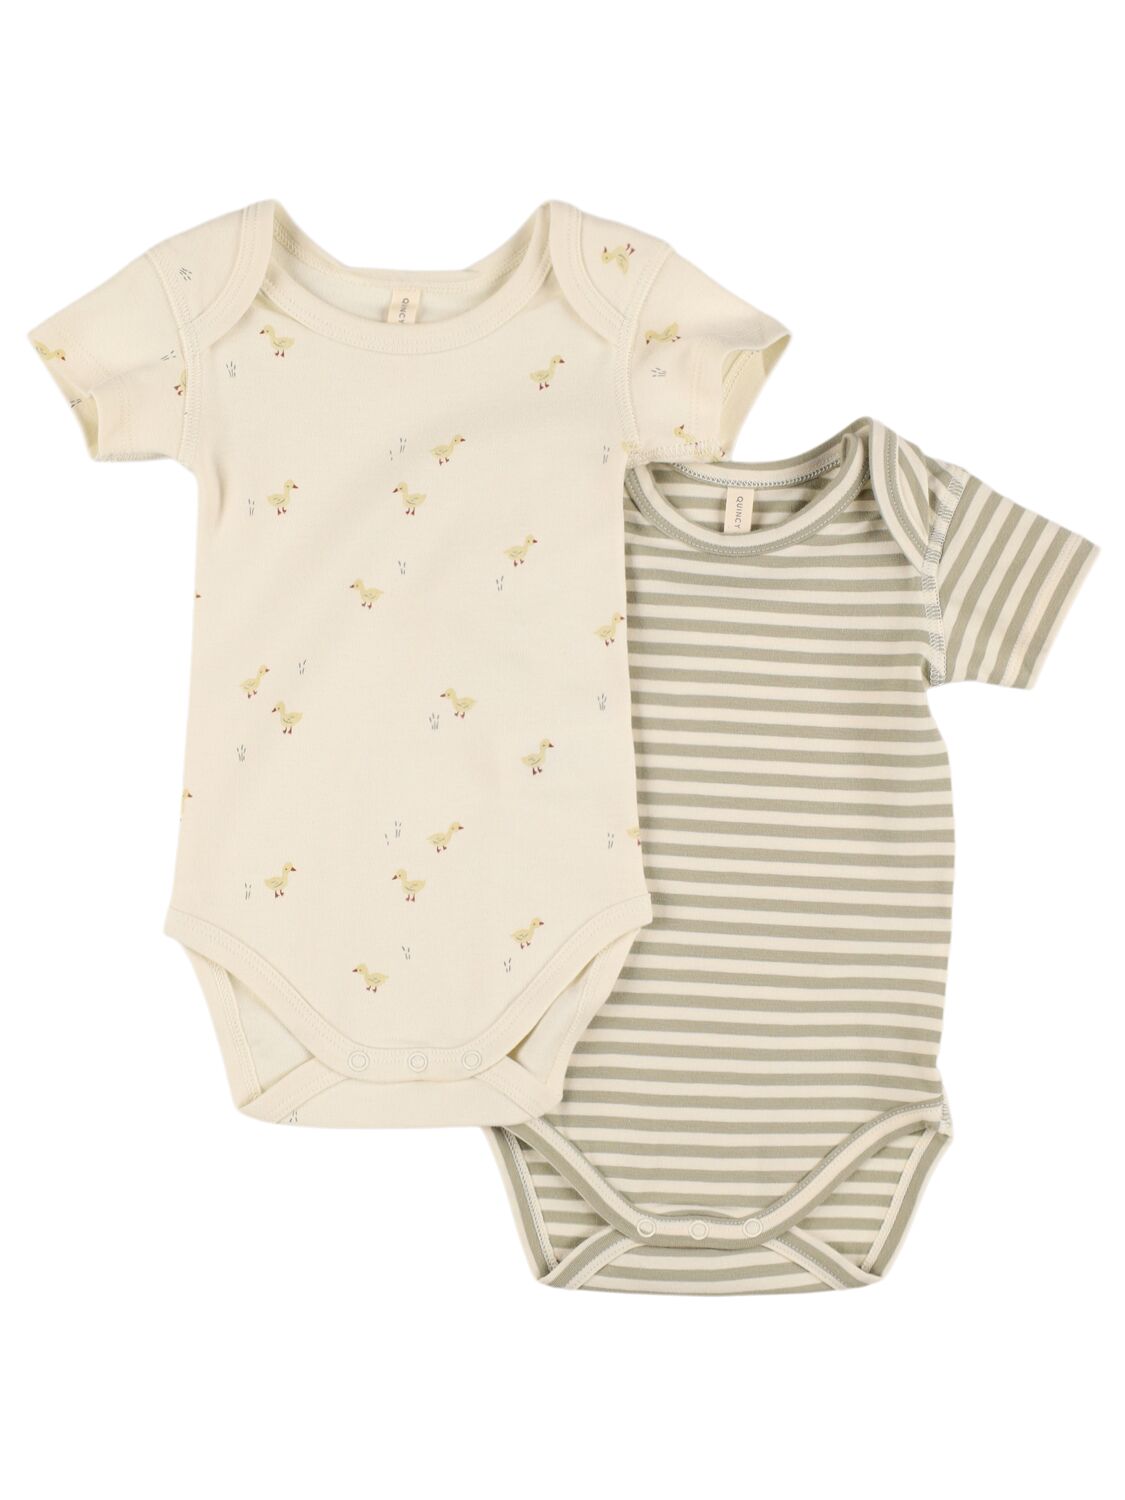 Quincy Mae Babies' Set Of 2 Organic Cotton Bodysuits In Multi